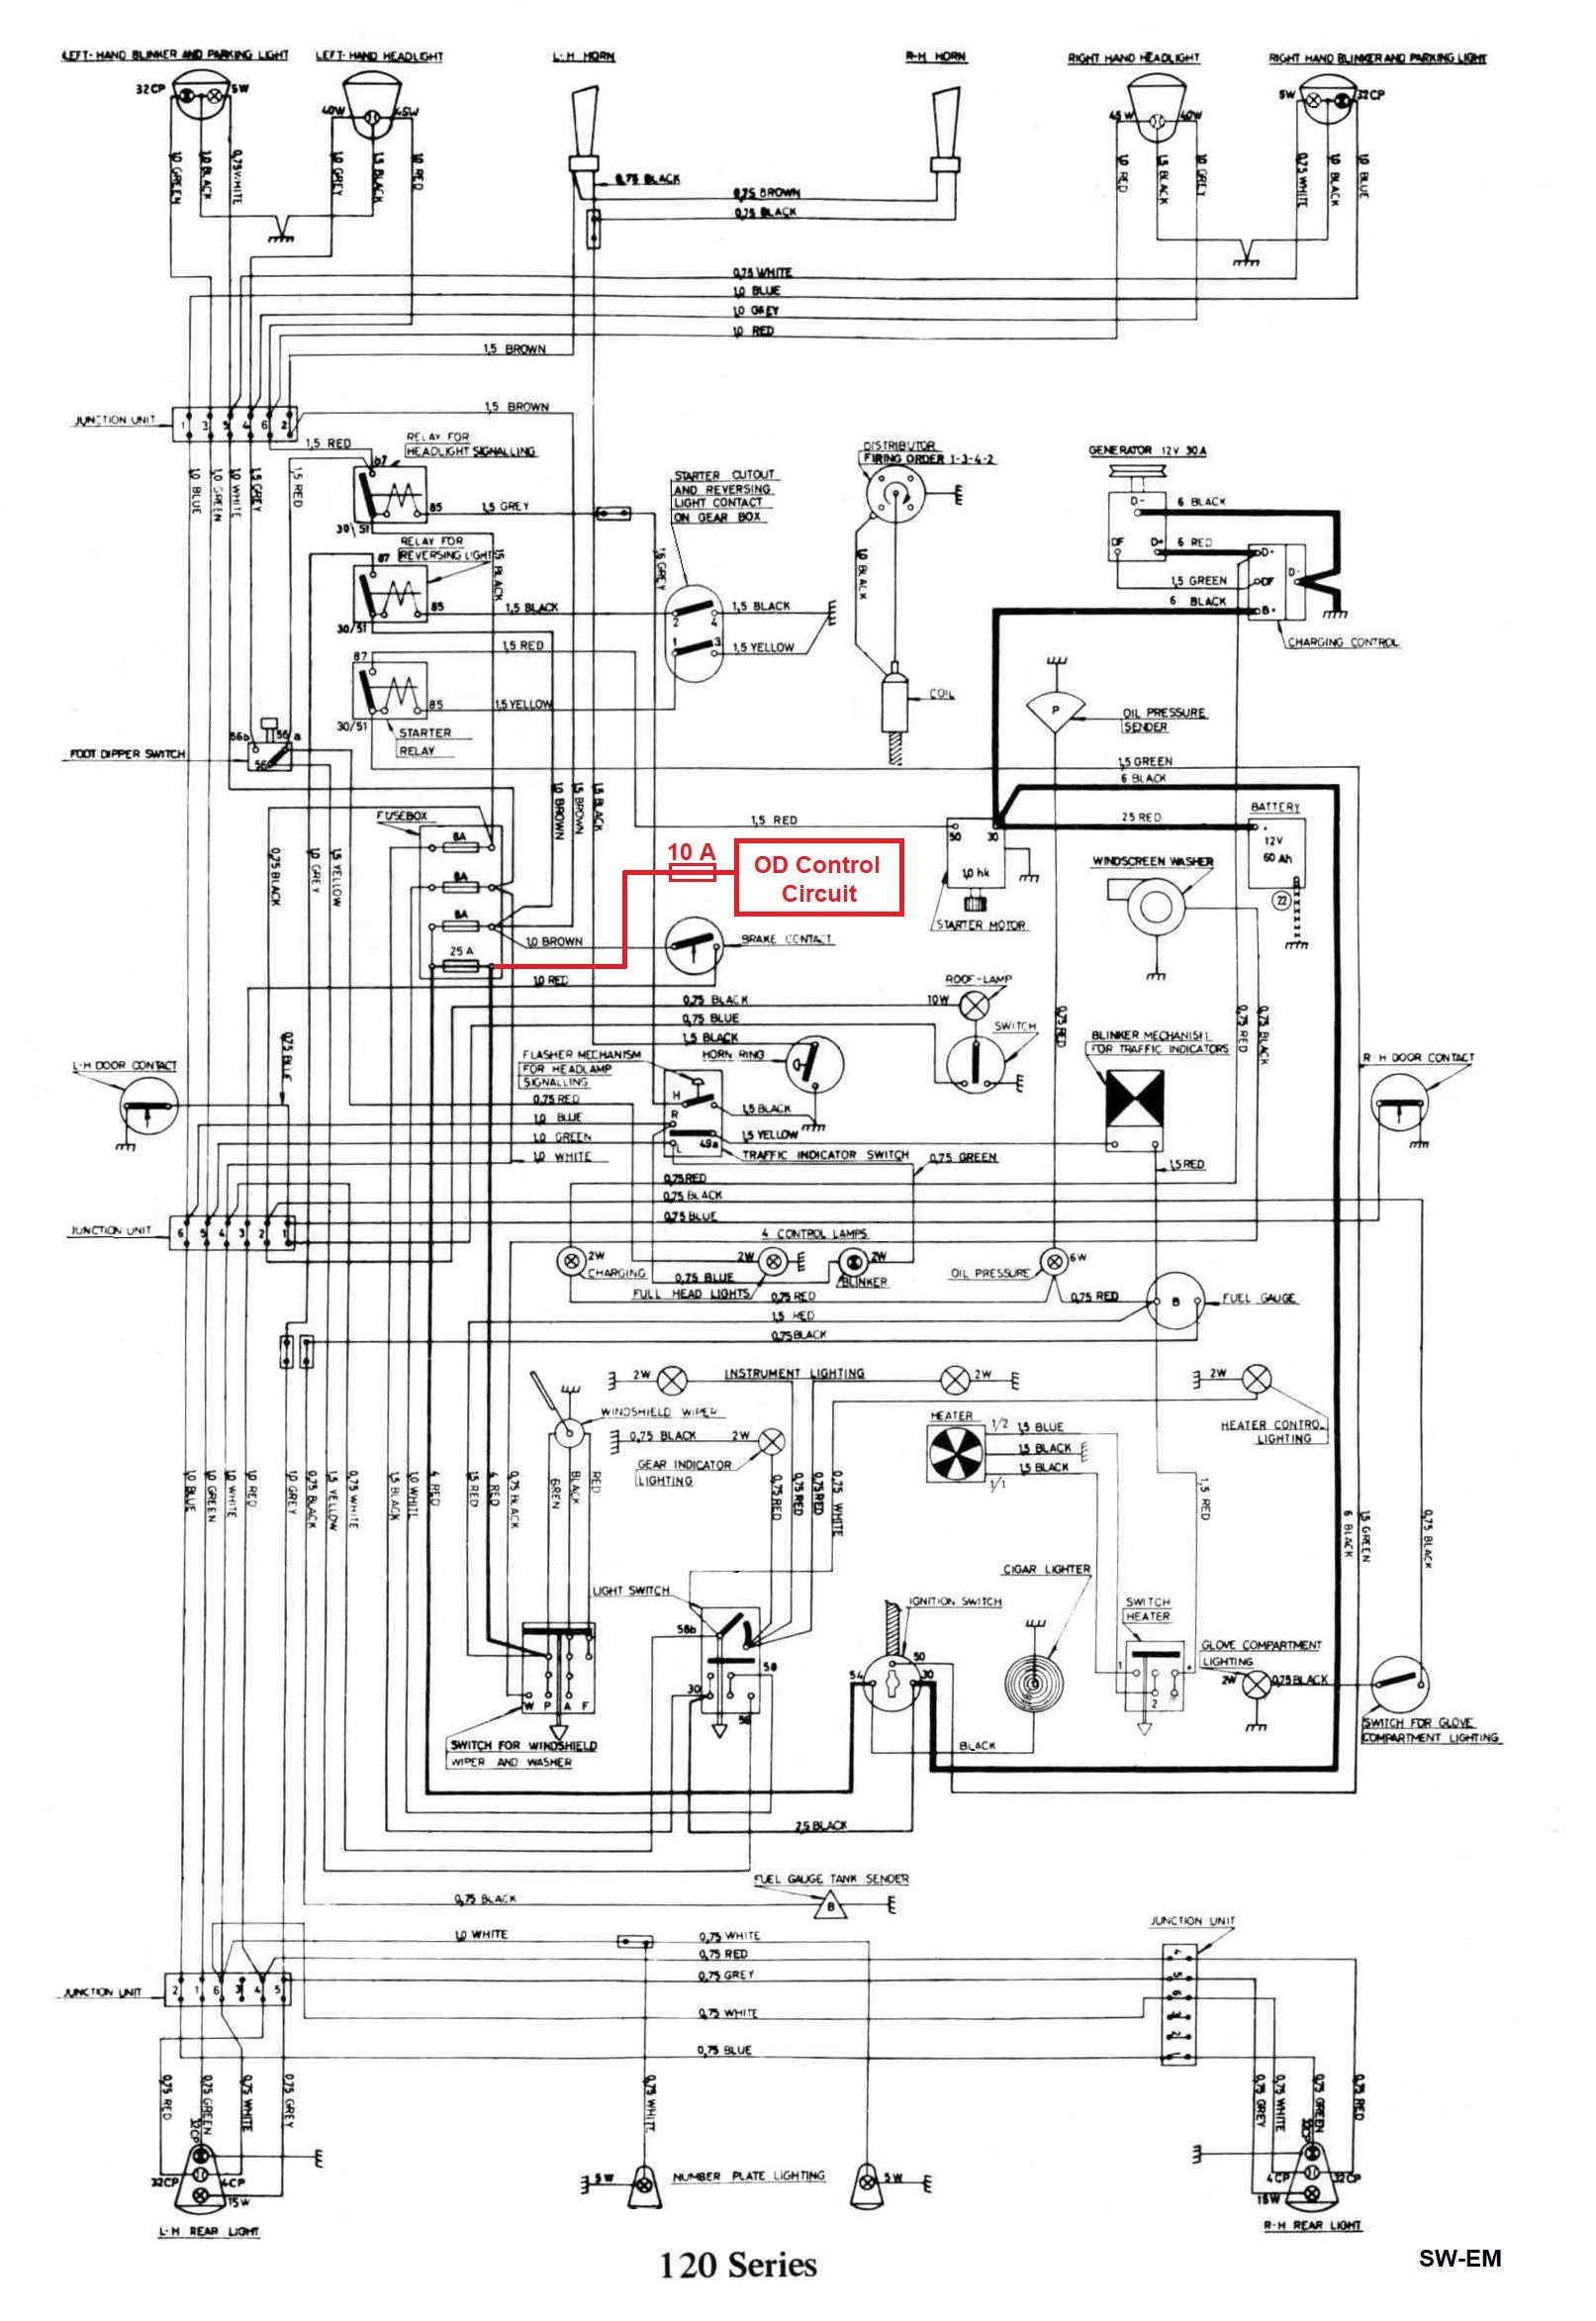 Car Ignition Wiring Diagram Ignition Coil Wiring Diagram Best Wiring Diagram for Car Ignition Of Car Ignition Wiring Diagram